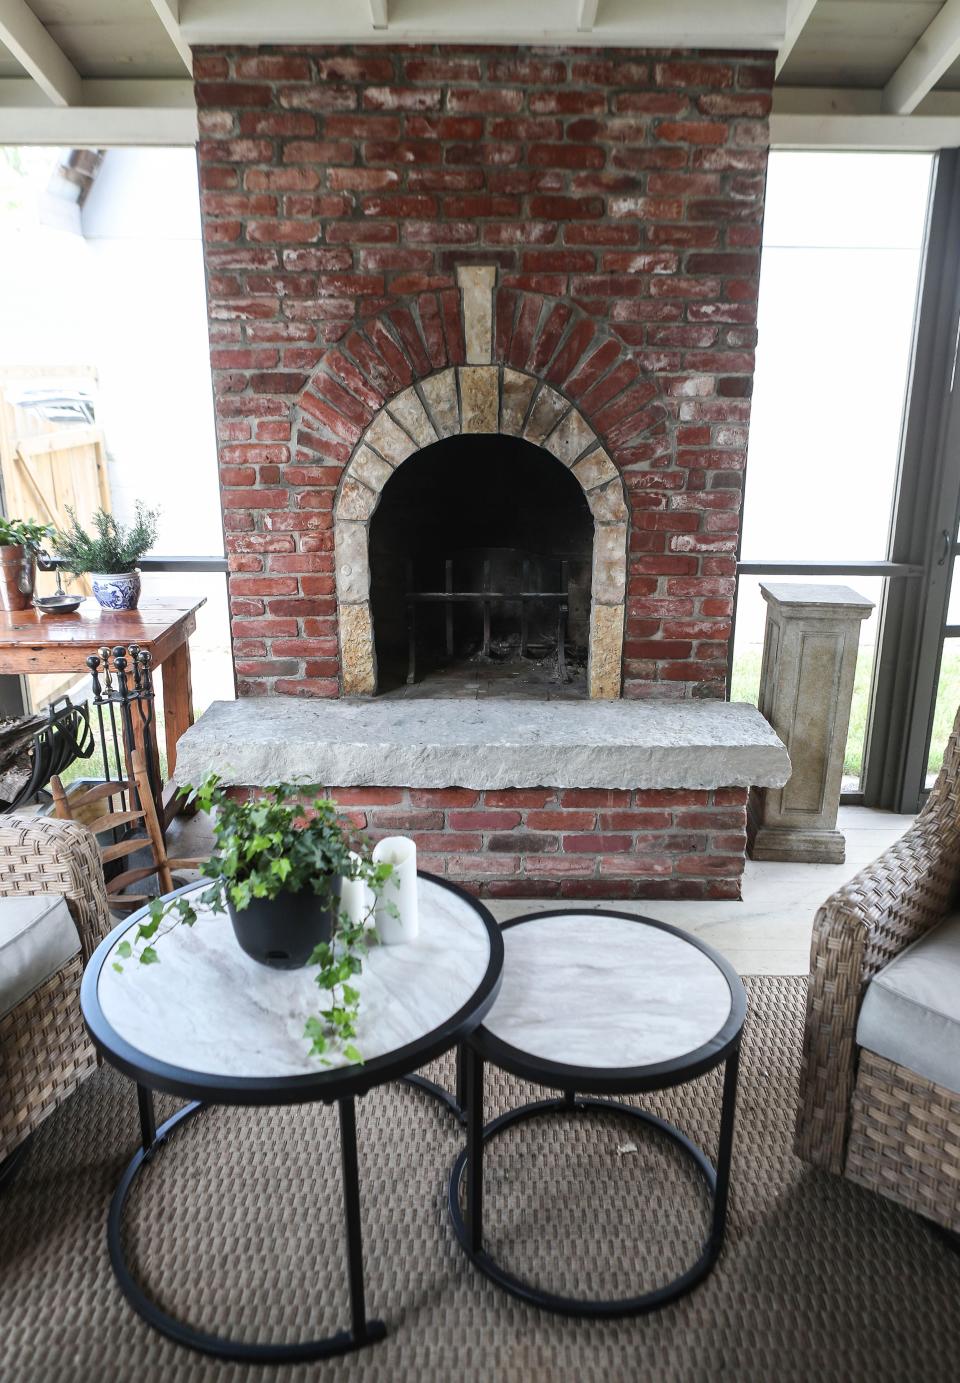 The recently-built back porch on the Sage's home was built for around $17,000 and features a brick fireplace, wood flooring and screens for a three-season area.